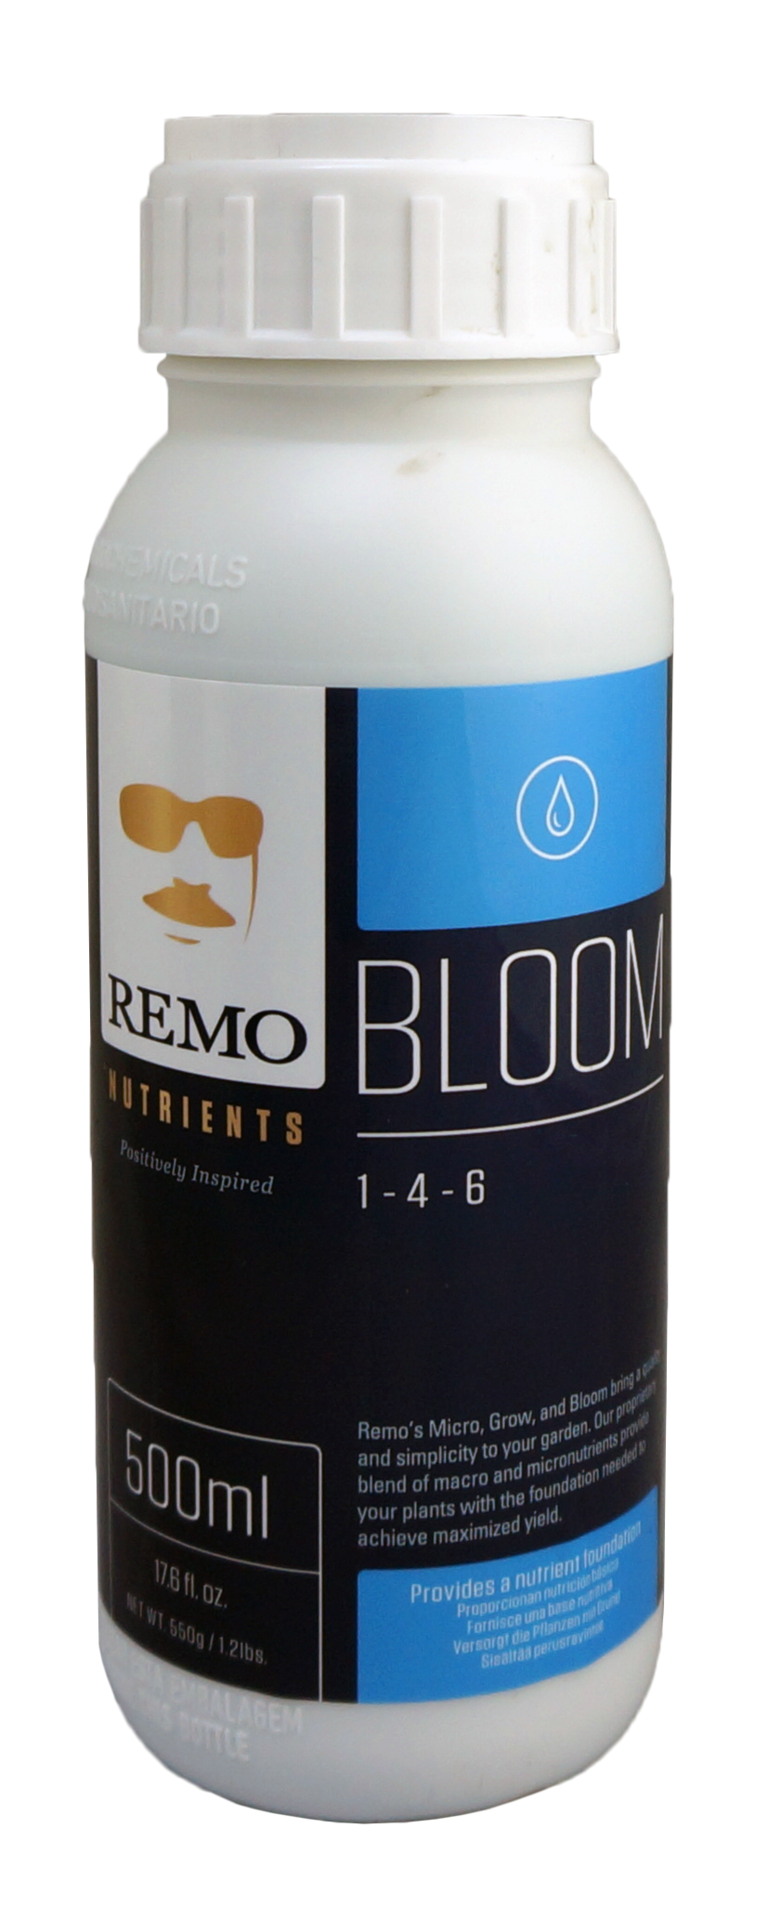 REMO BLOOM 500ml